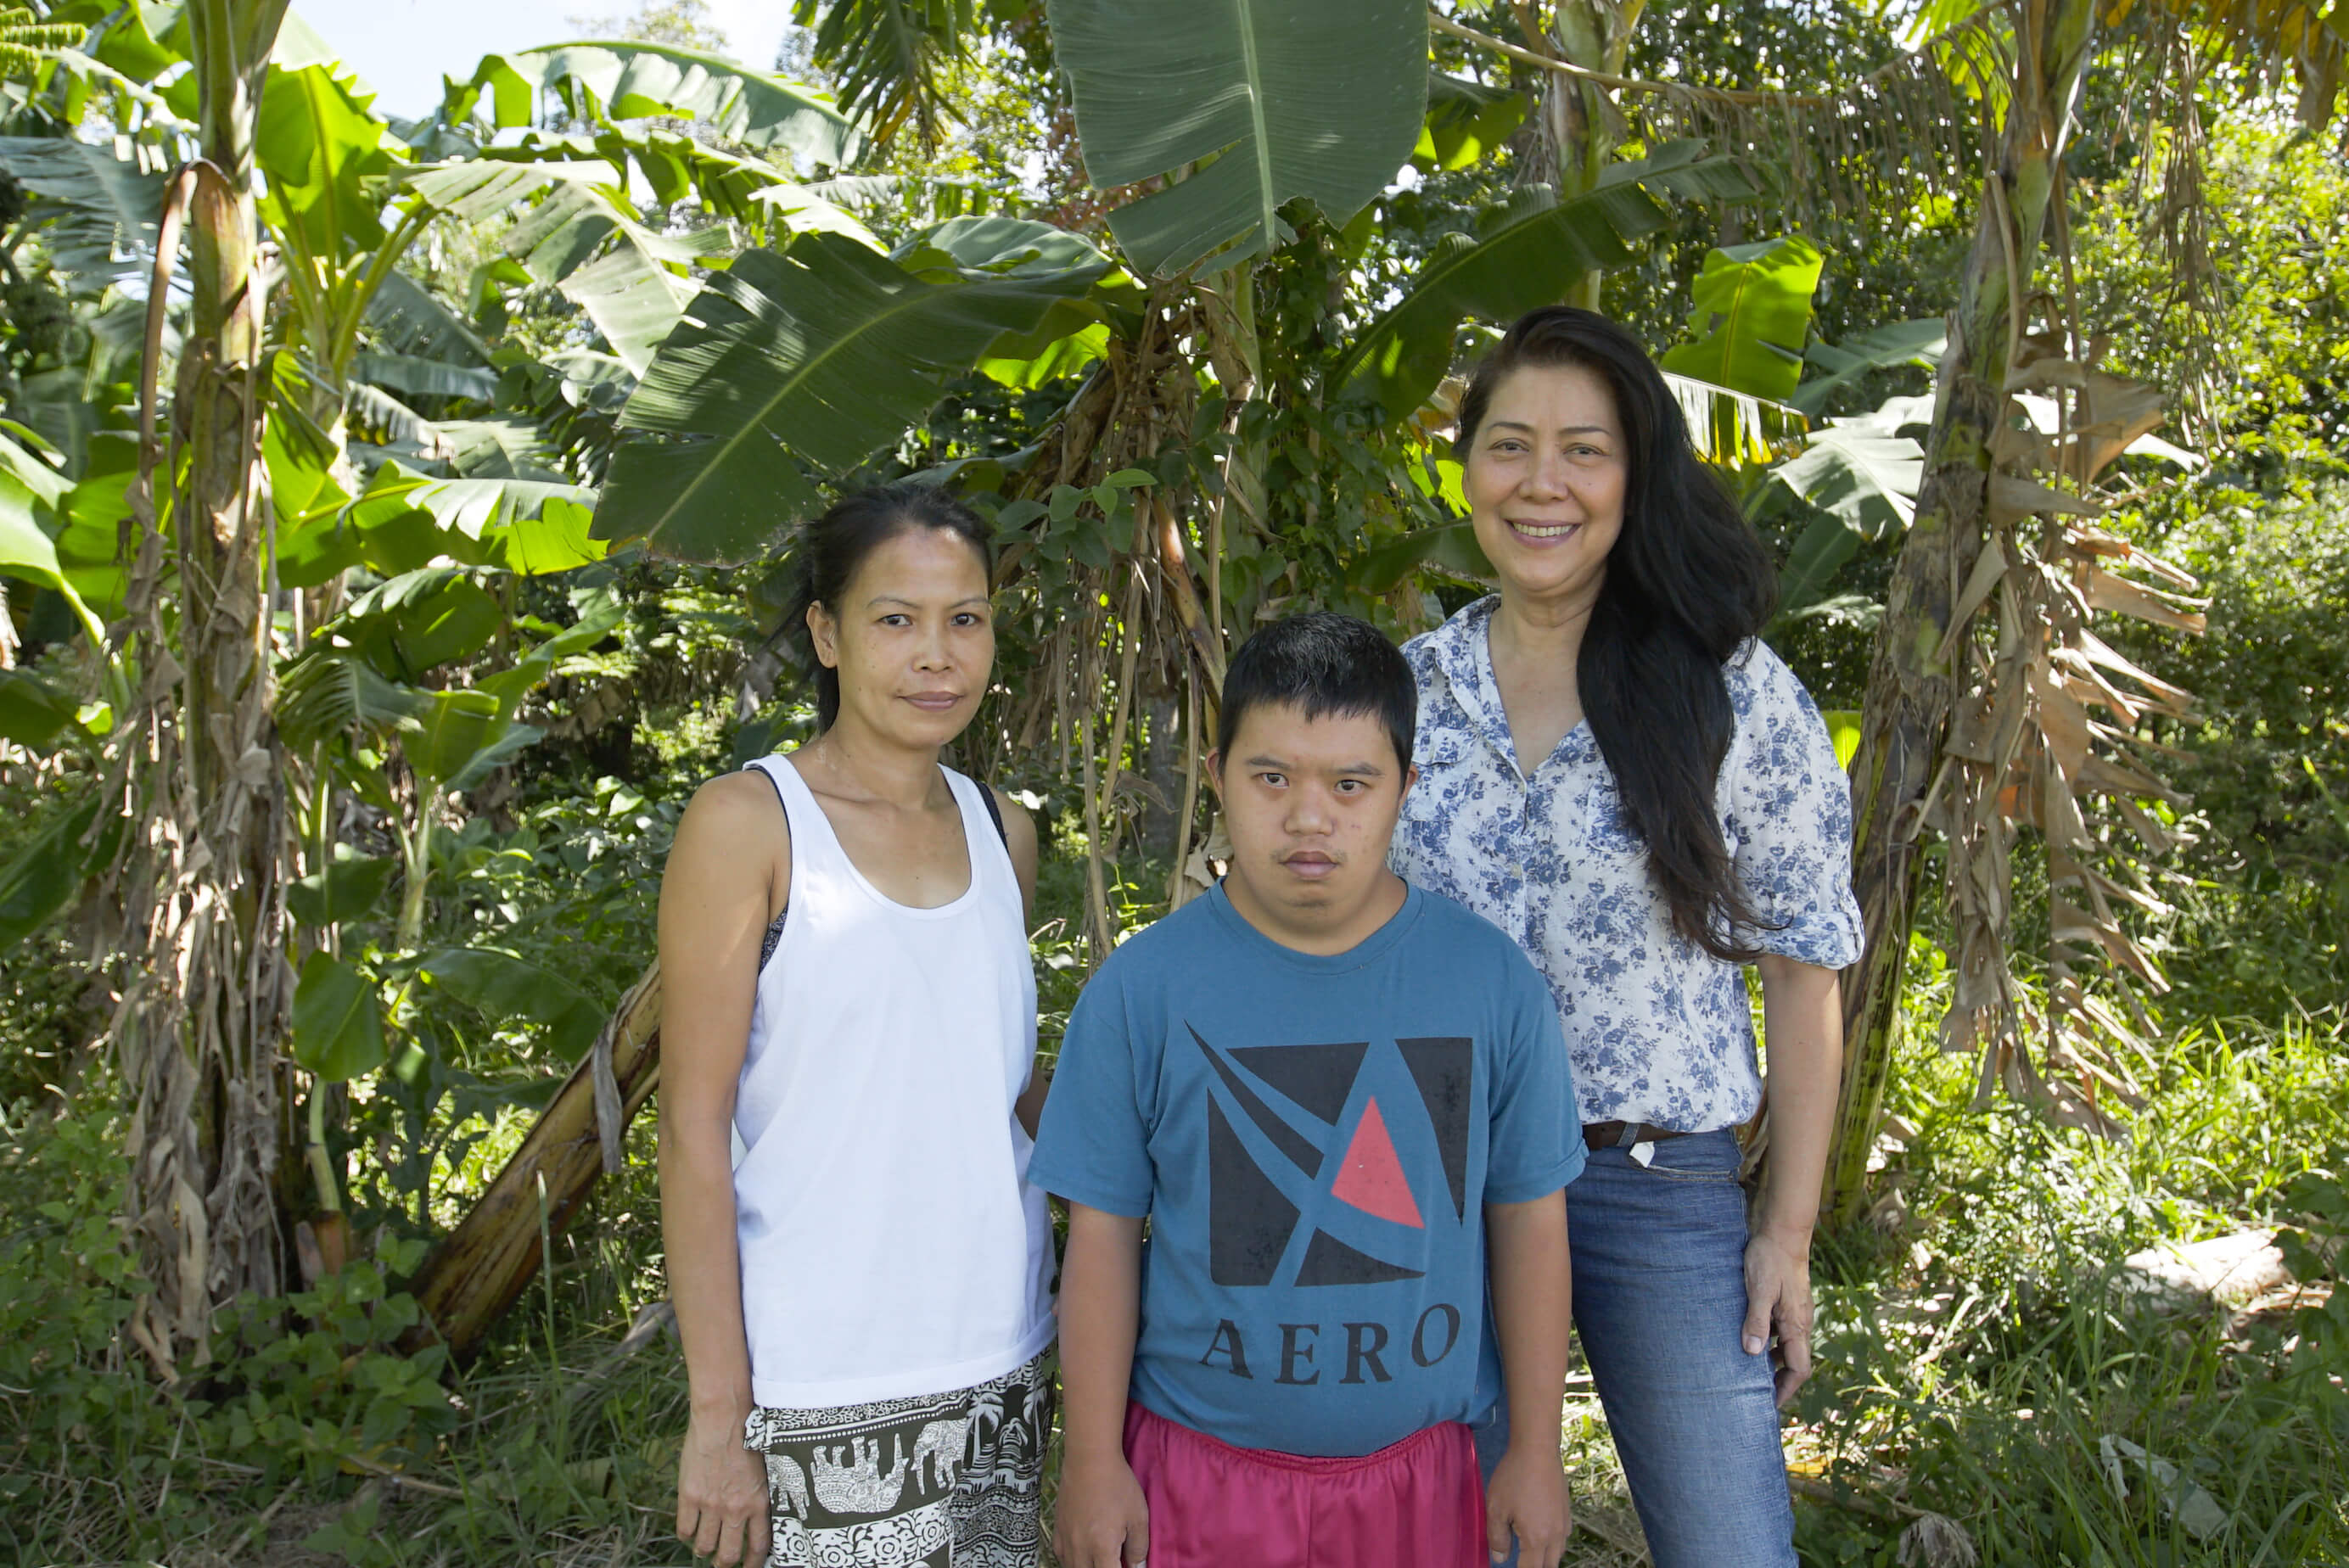 Two women stand with a man between them under the shade of a banana tree.